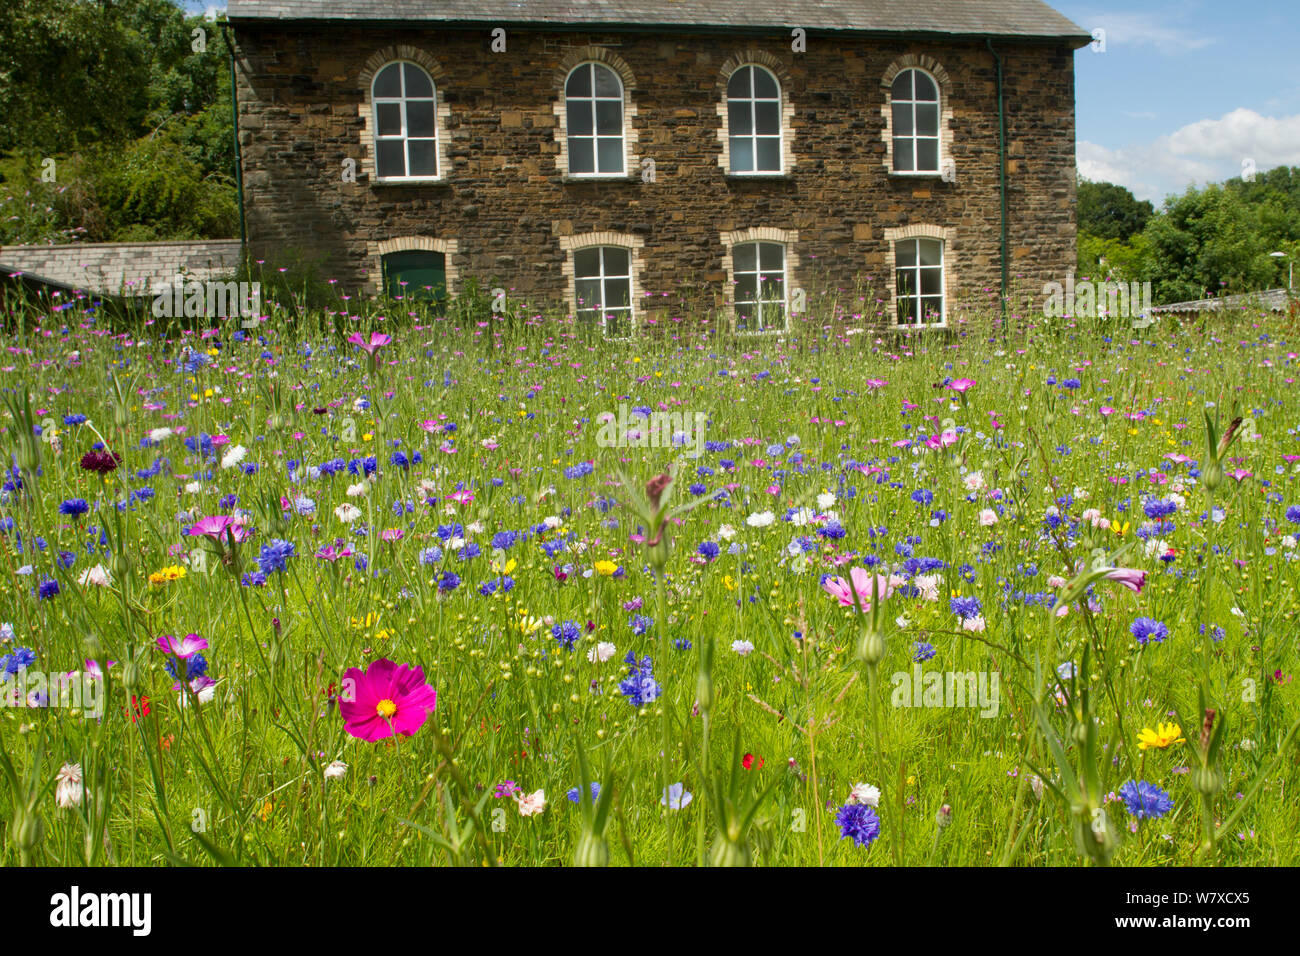 Wildflower garden outside old Welsh chapel. Sown to attract bees as part of the Friends of the Earth &#39;Bee Friendly&#39; campaign with the Bron Afon Community Housing Association, Cwmbran, South Wales, UK. July 2014. Stock Photo